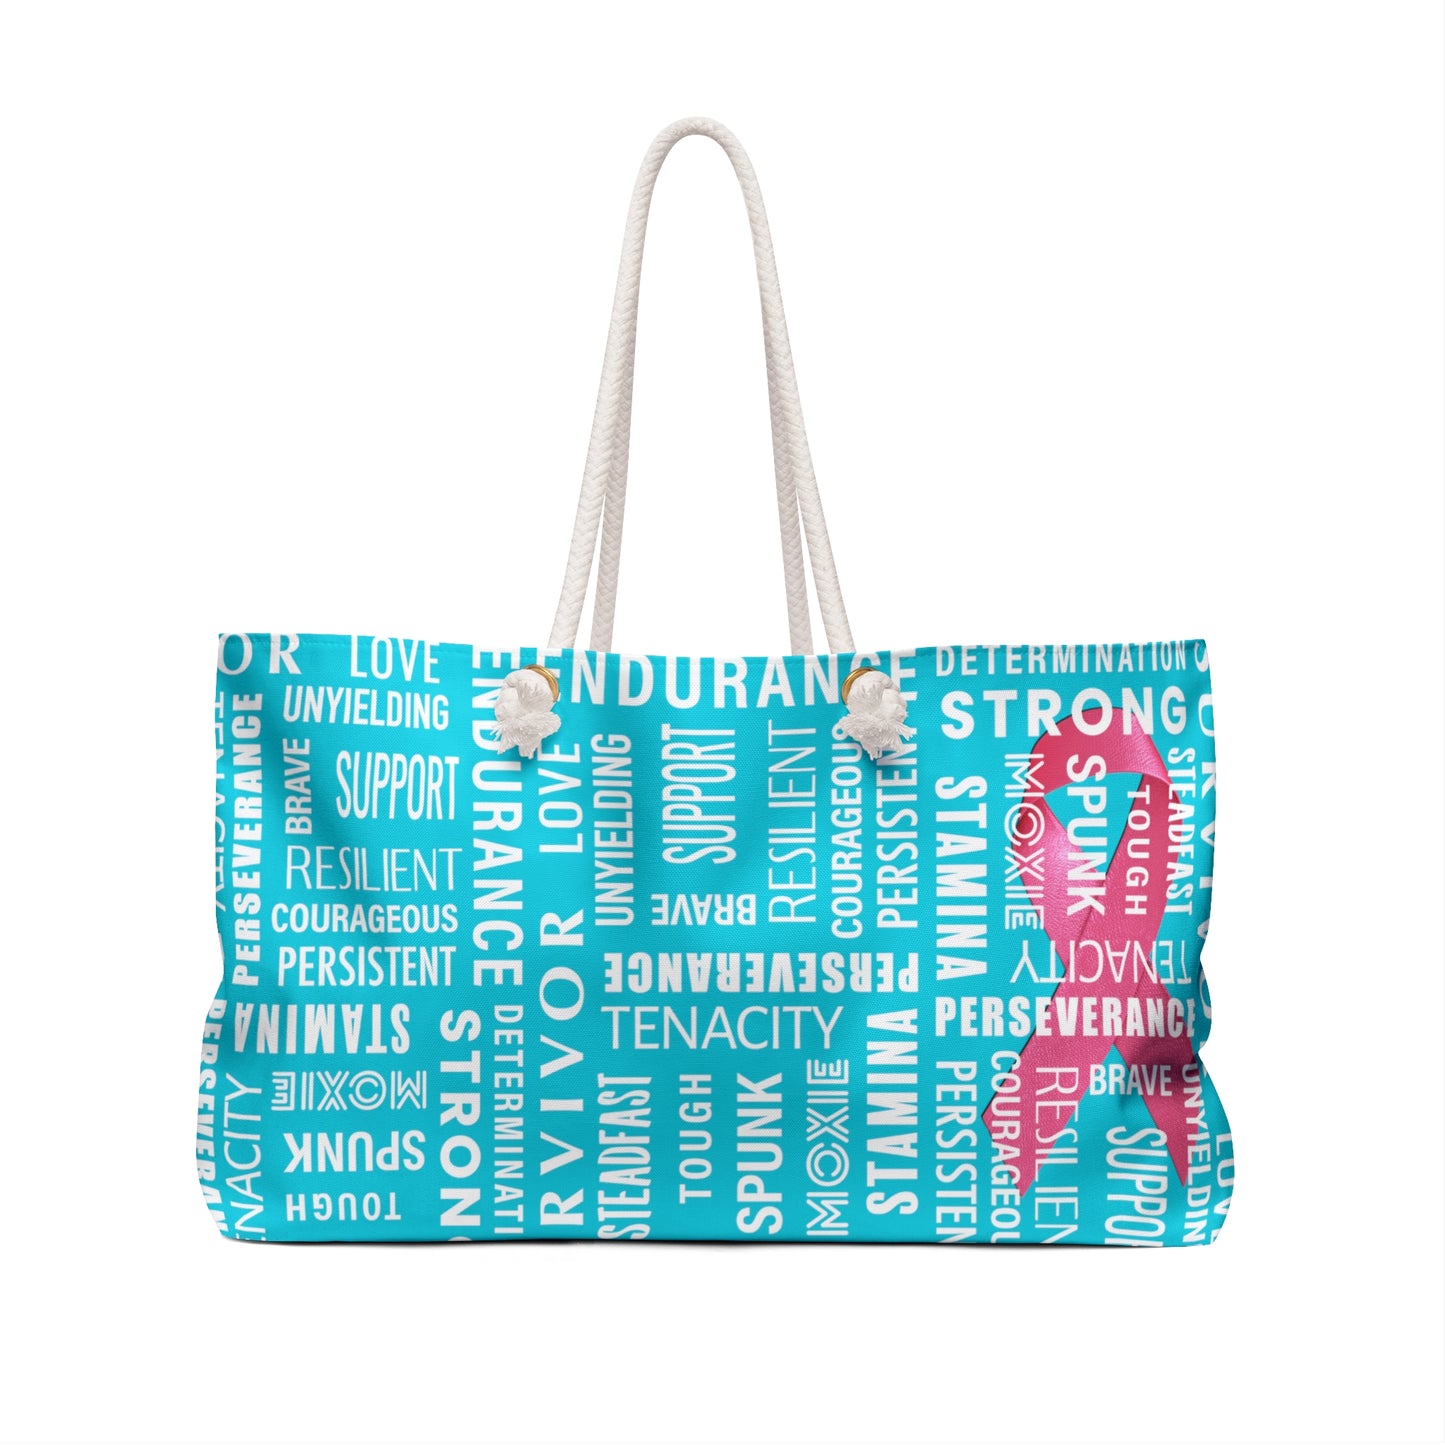 Celebrating the Survivors Supporting the Fighters - dark turquoise 00d0e3 - Weekender Bag